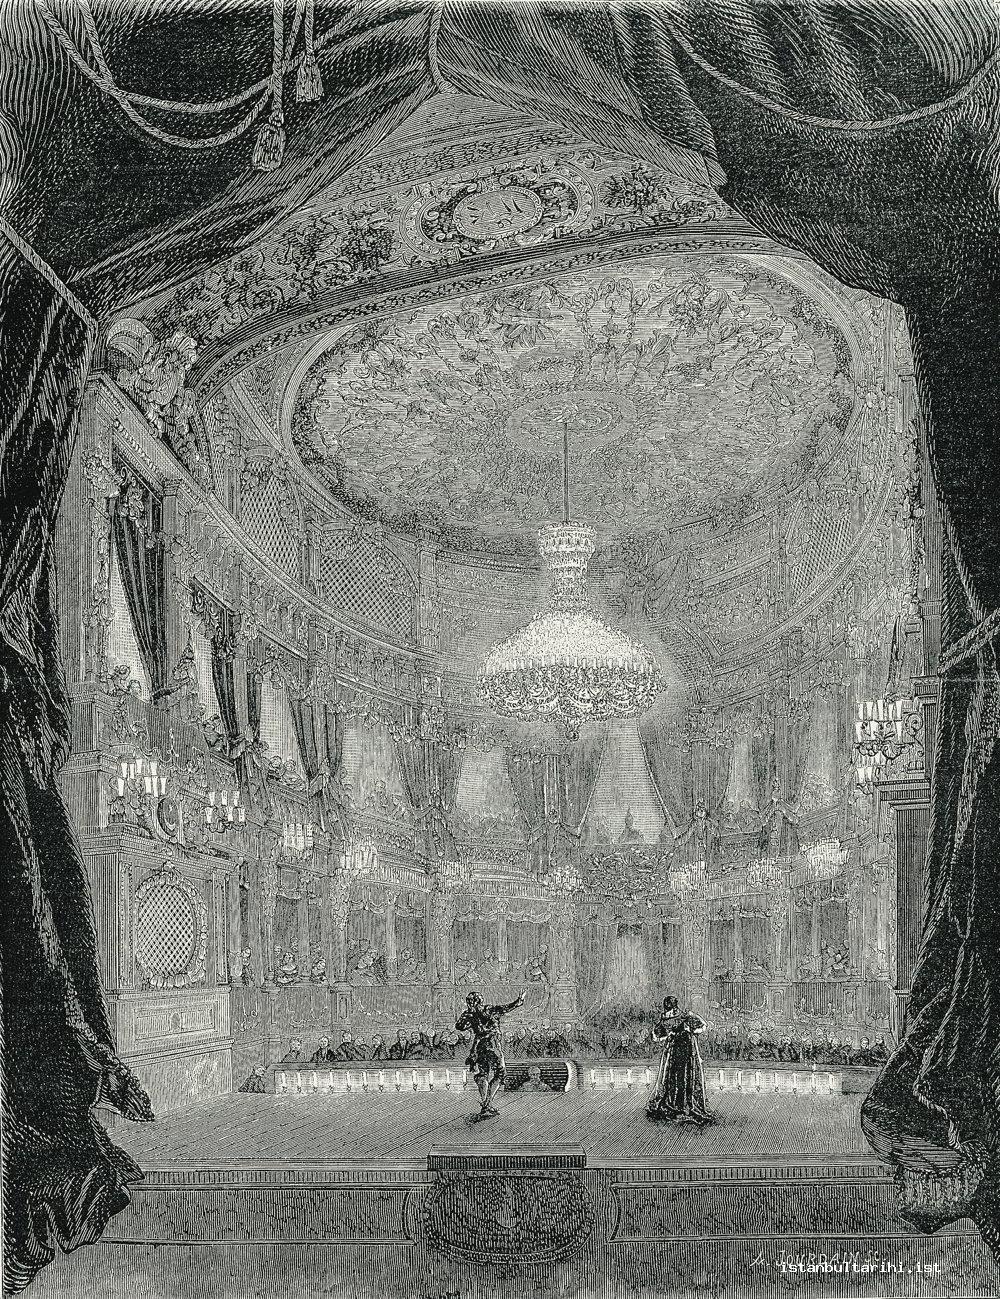 20- A play in Dolmabahçe Palace Theatre the decoration of which was done by F.Séchan, the decorator of French Opera building (<em>L’illustration</em>, 25 June 1859)